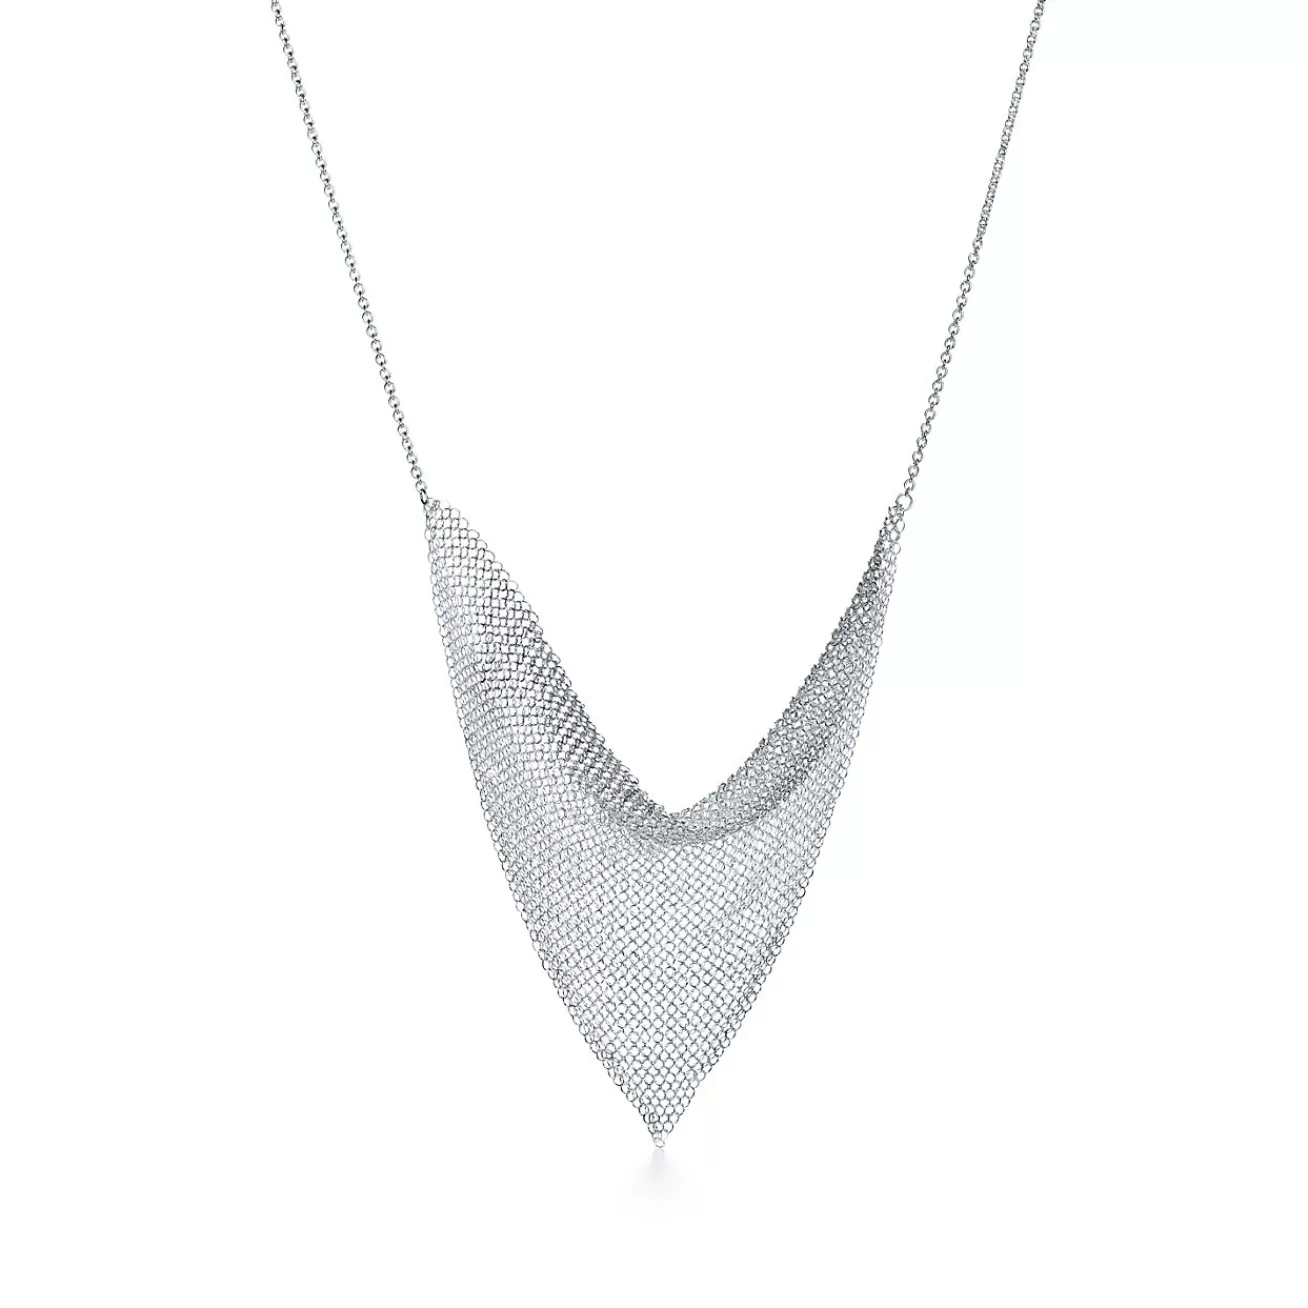 Tiffany & Co. Elsa Peretti® Mesh triangle necklace in sterling silver. | ^ Necklaces & Pendants | Sterling Silver Jewelry